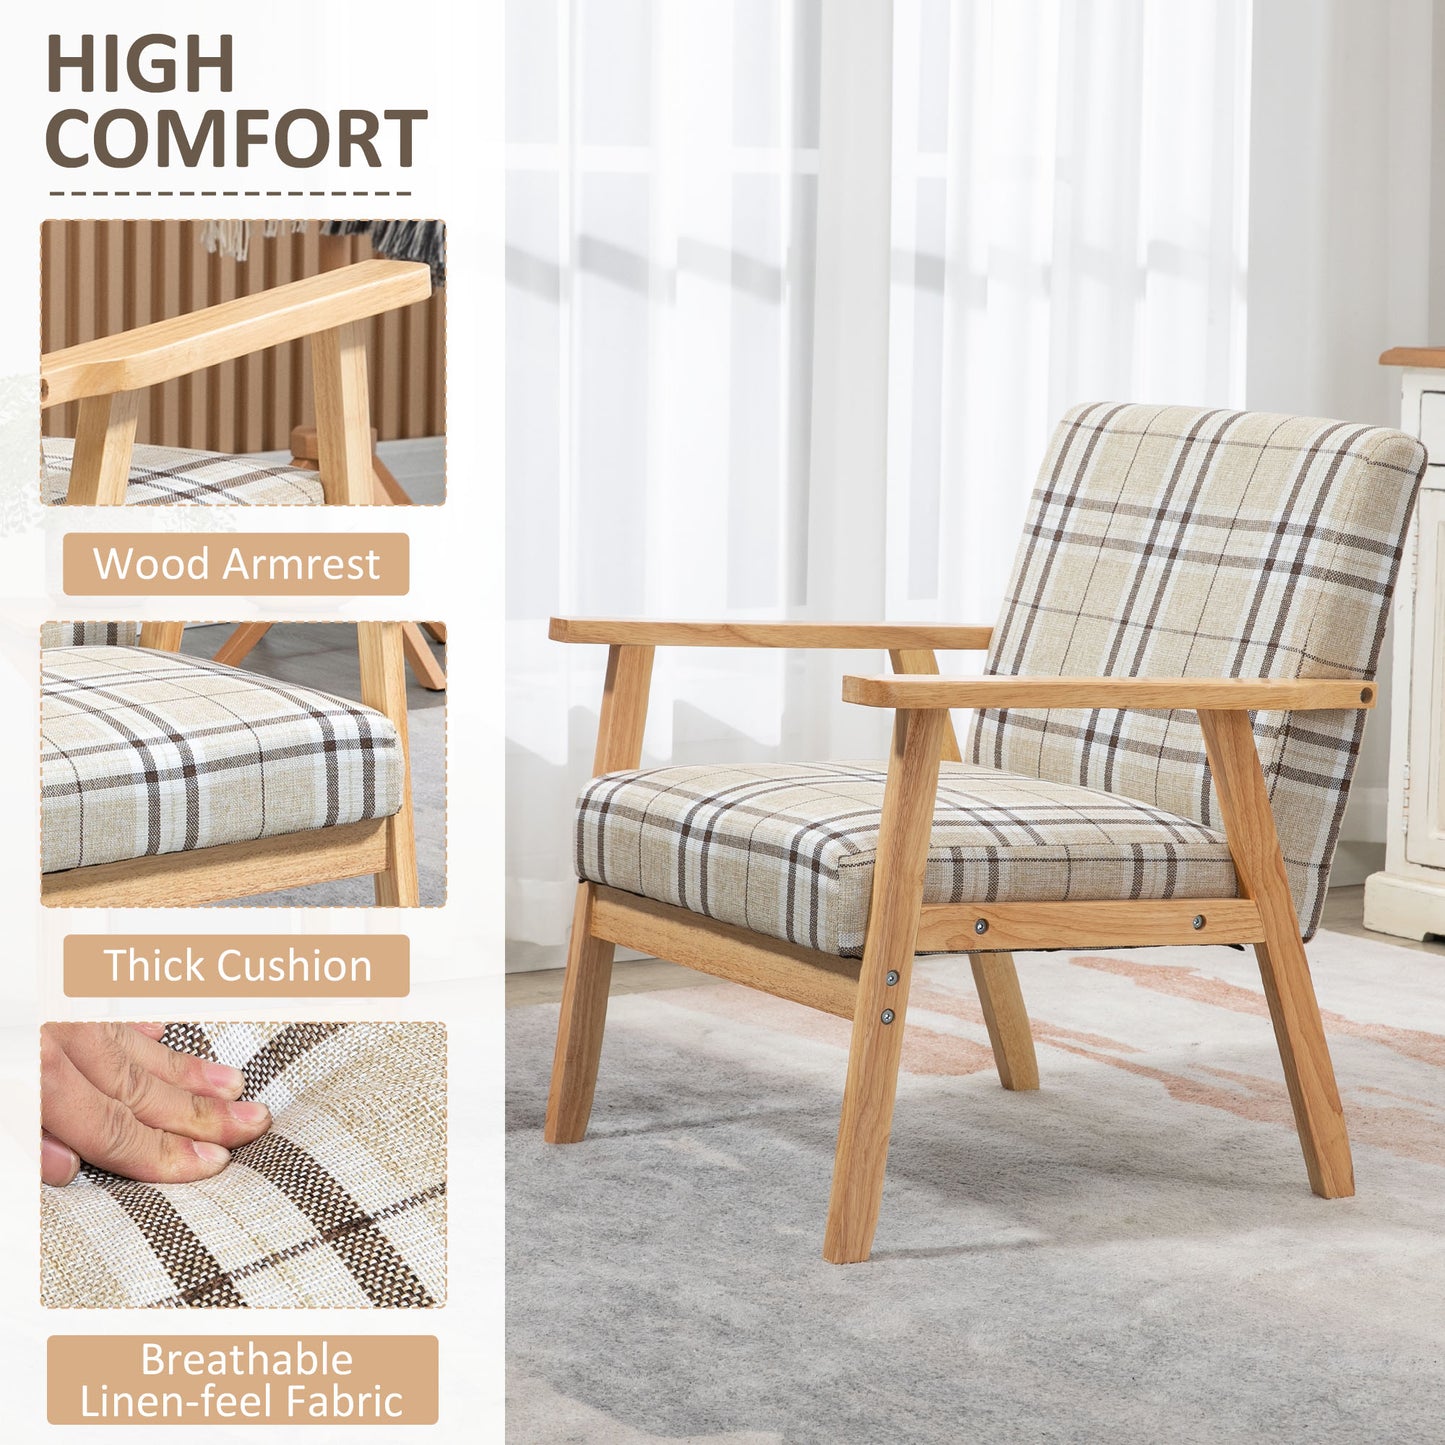 HOMCOM Modern Accent Chairs with Cushioned Seat, Upholstered Linen-Feel Armchair for Bedroom, Living Room Chair with Arms and Wood Legs, Beige